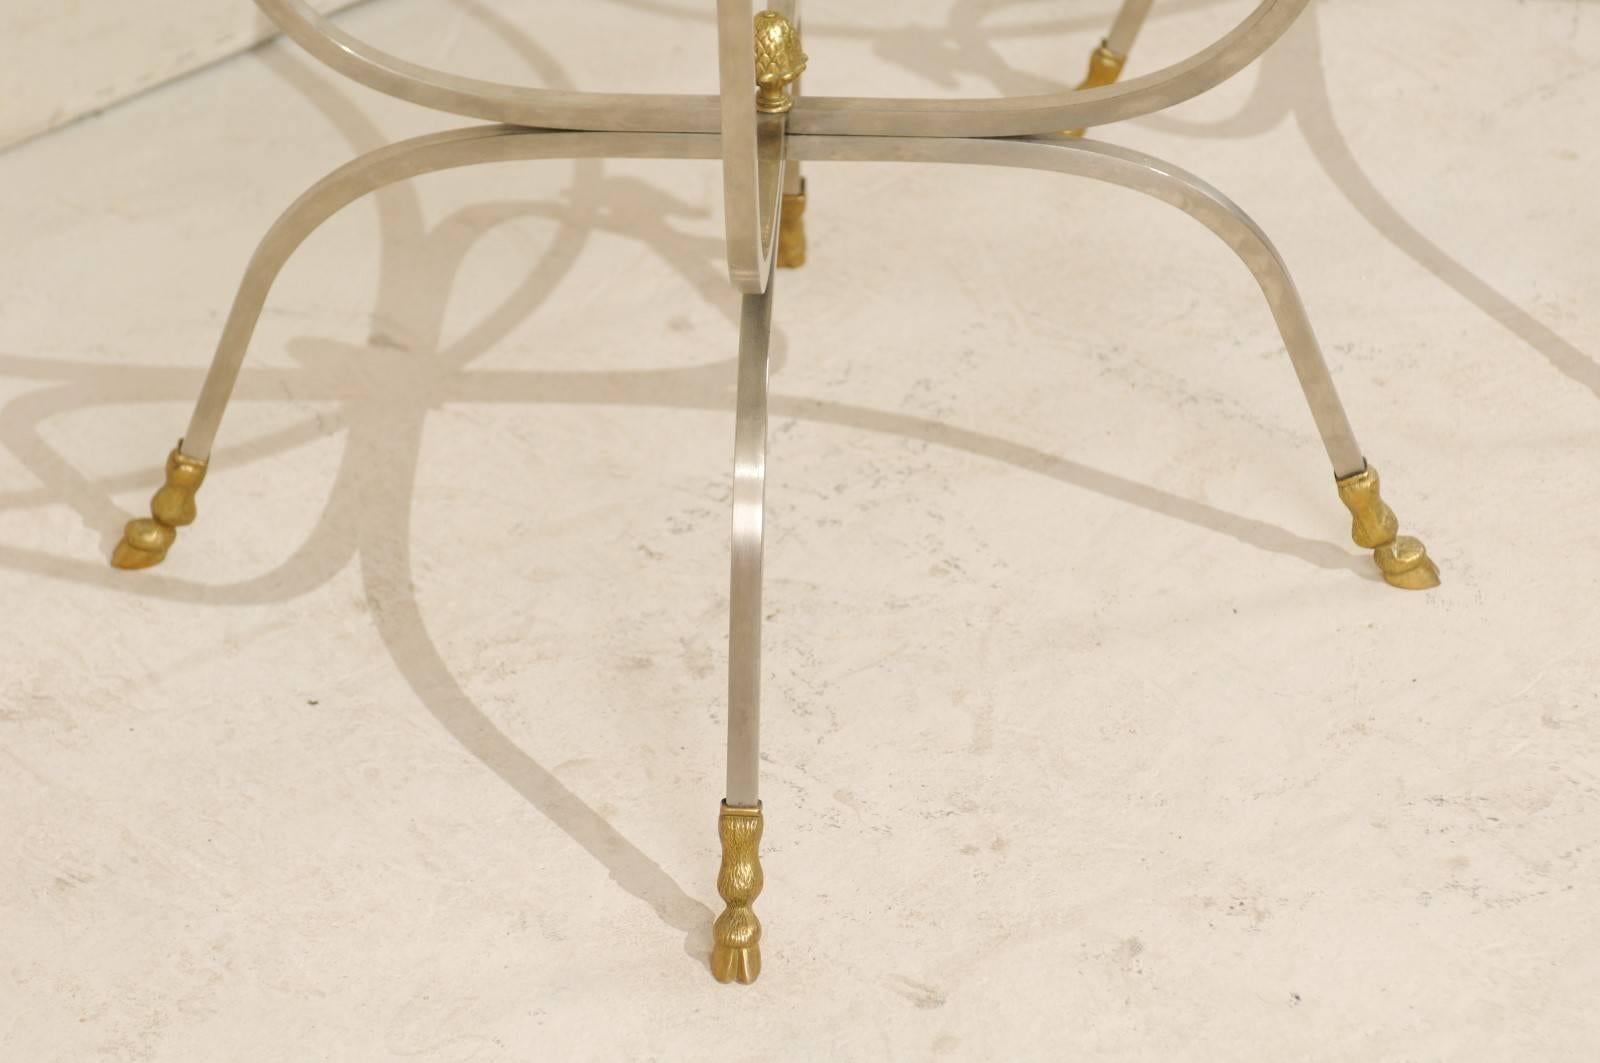 Pair of Italian Glass, Brass and Silver Metal Side Tables with Ram's Head Motifs 1